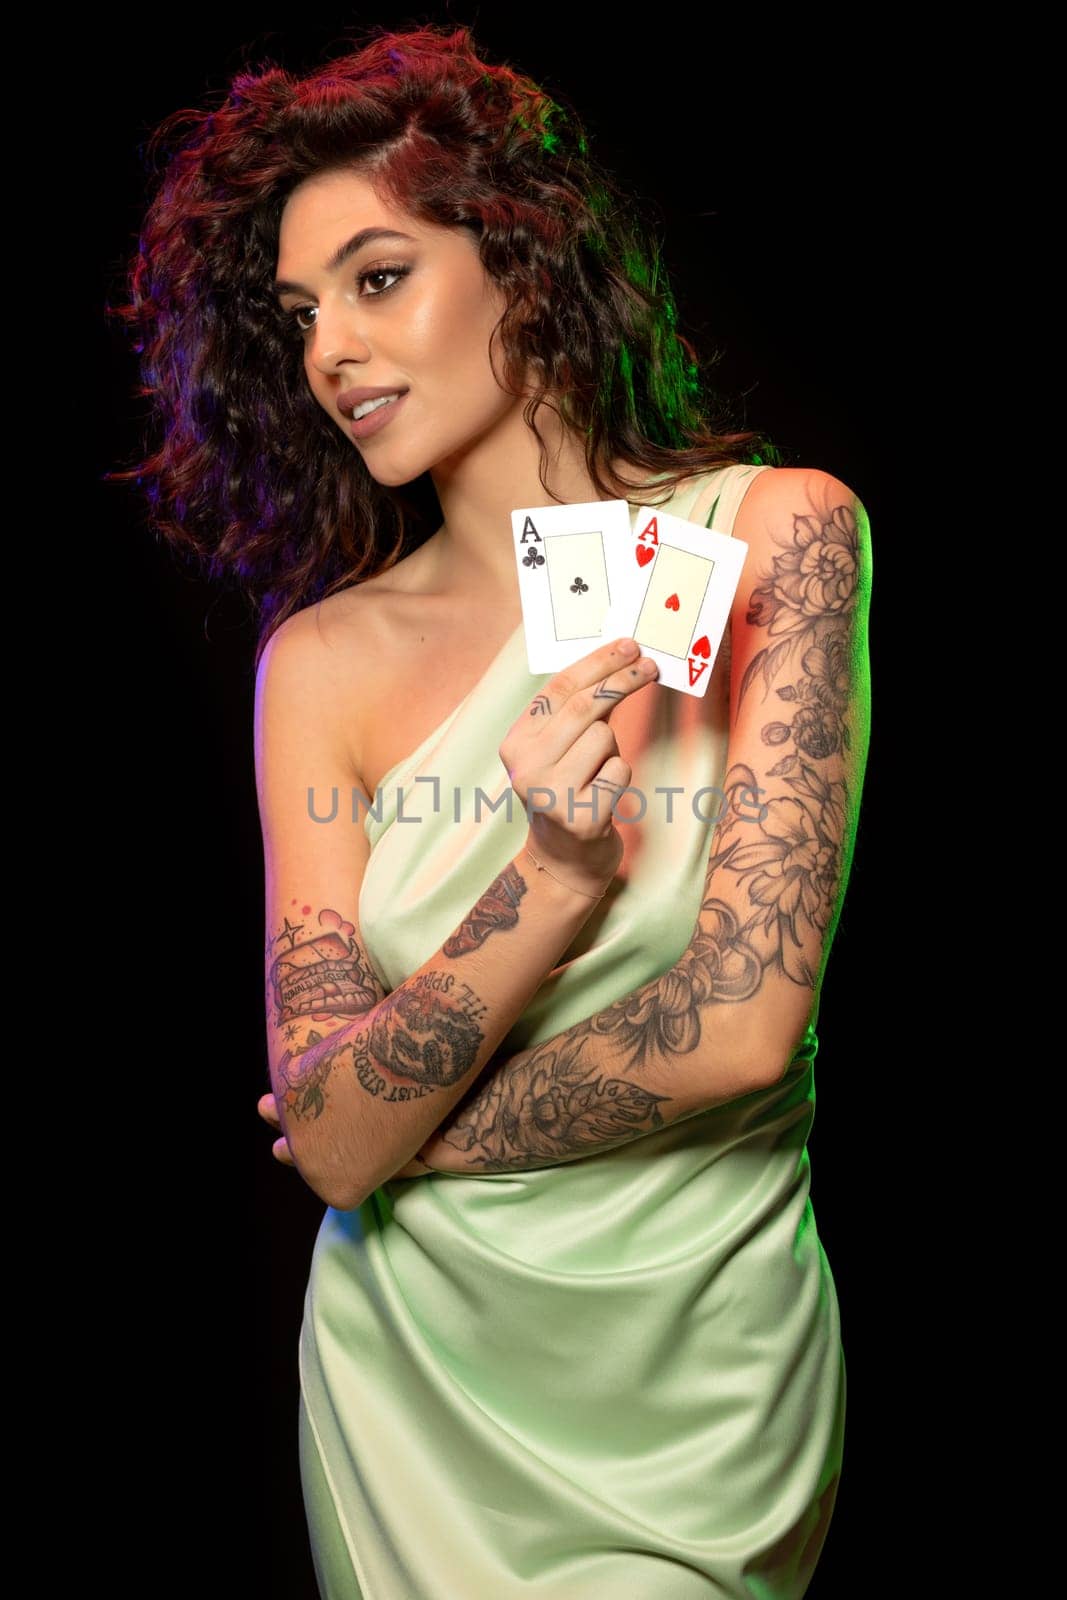 Lucky elegant young brown-haired girl in silk dress satisfied with successful poker game standing against black background, showing set of winning cards from pair of aces. Fortune smiled